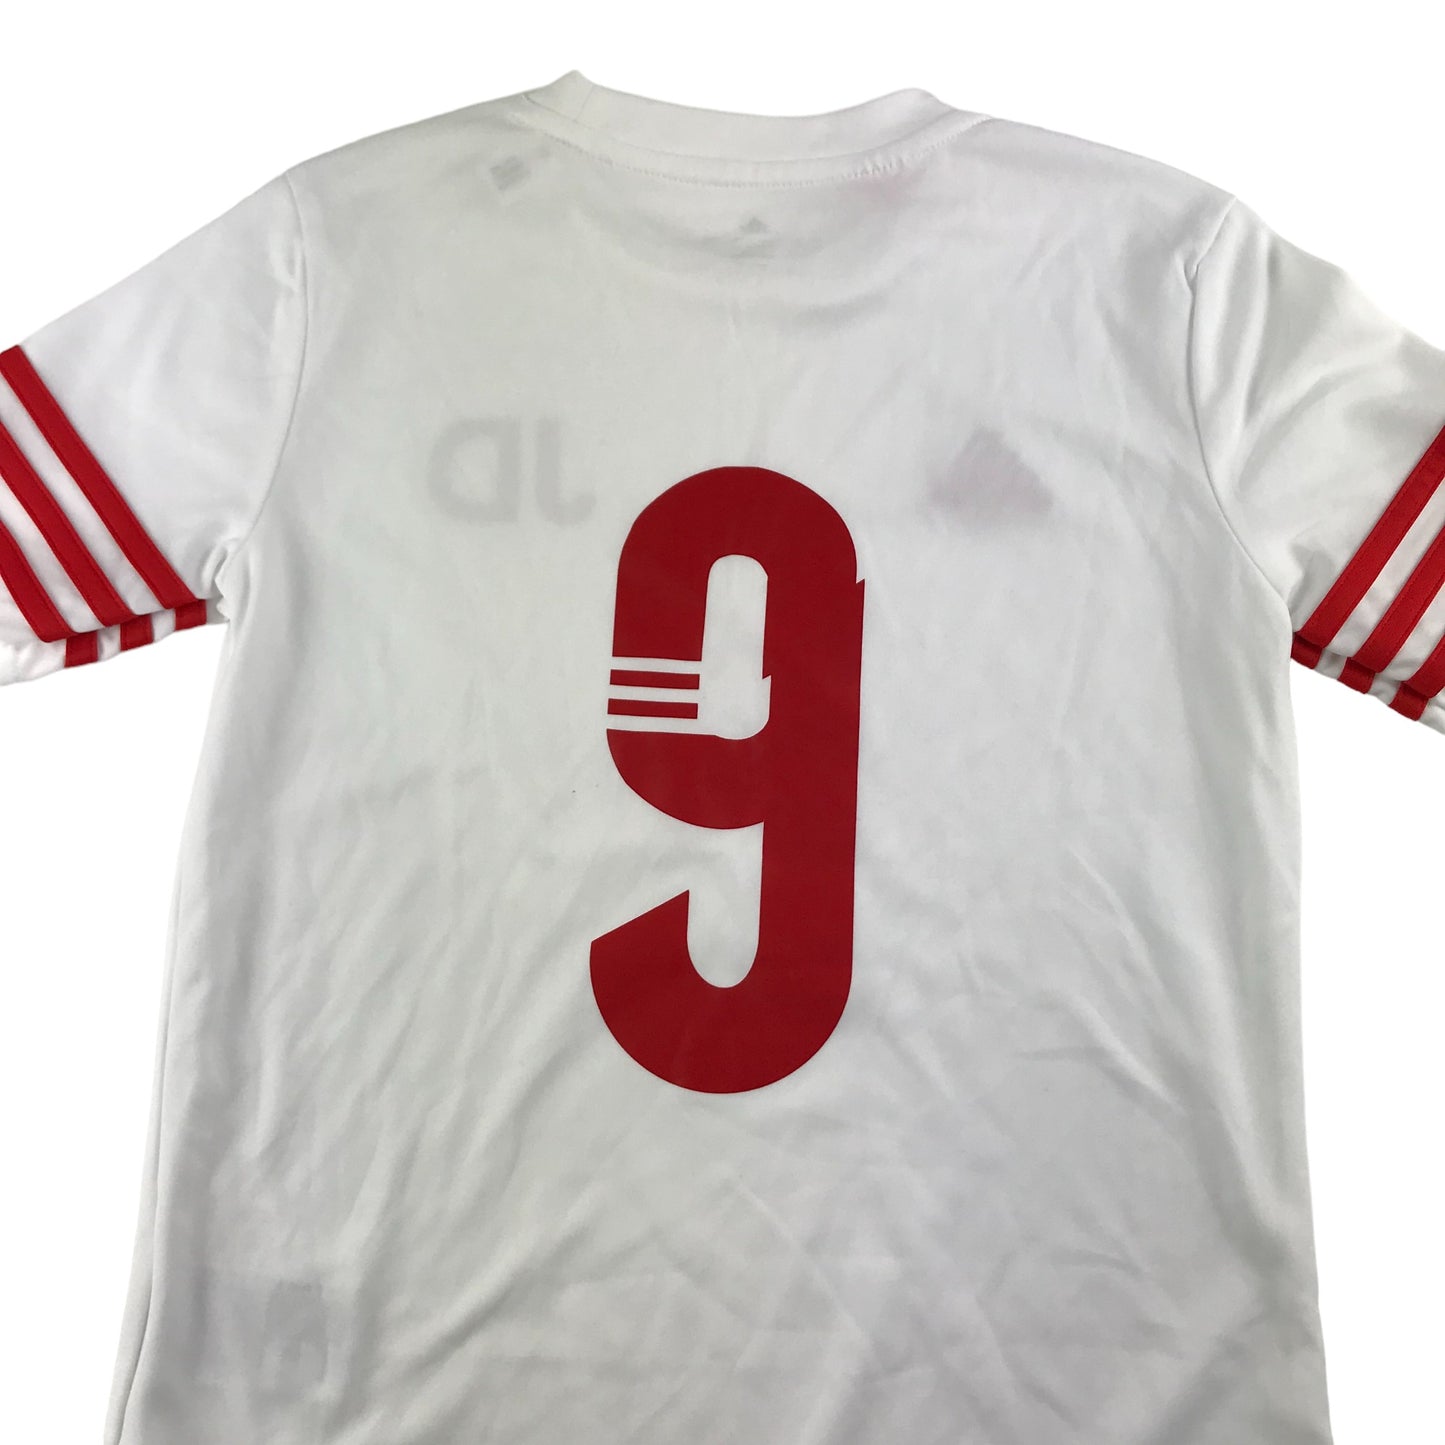 Adidas Football Strip Age 9 White Number 9 JD Sports Top